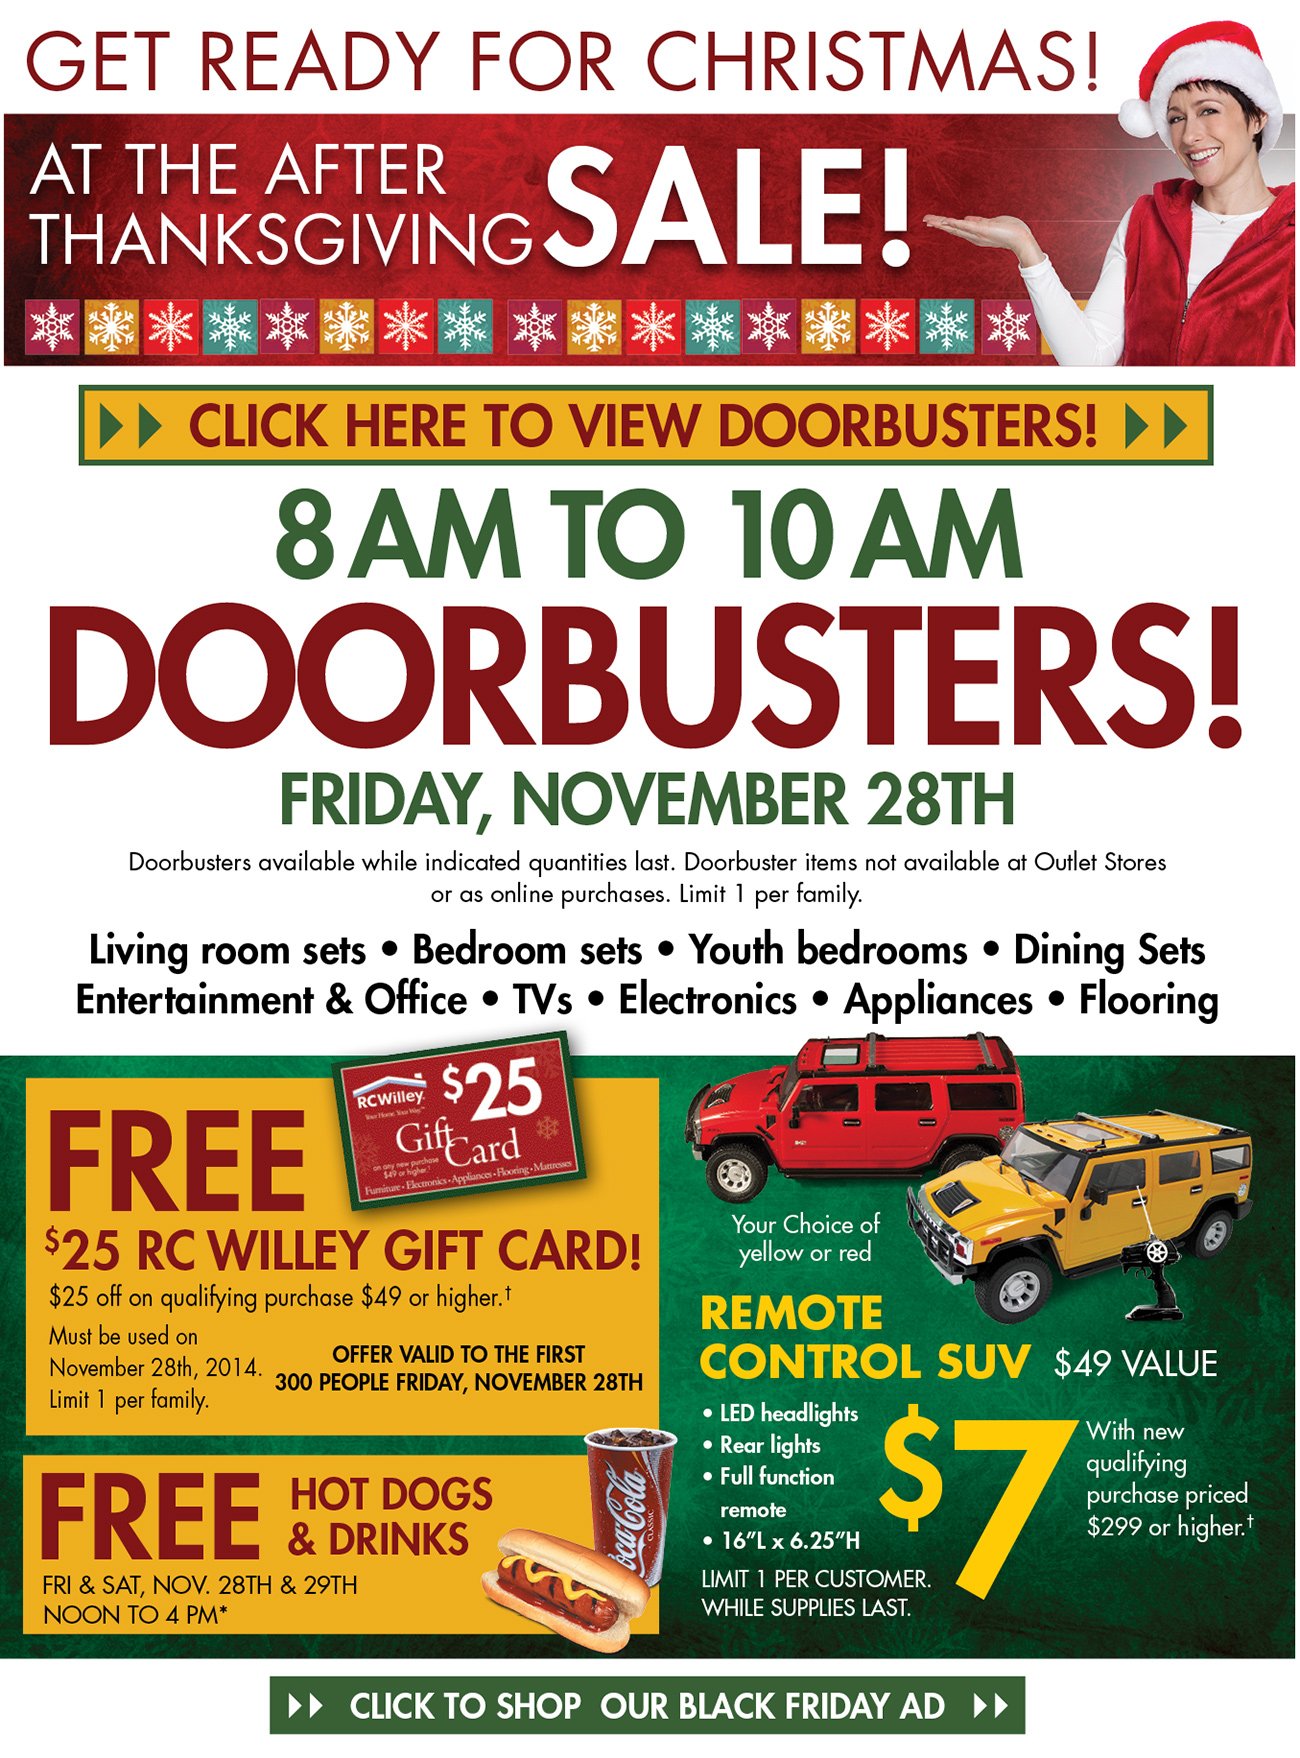 Black Friday Doorbusters! RC Willey Furniture Store